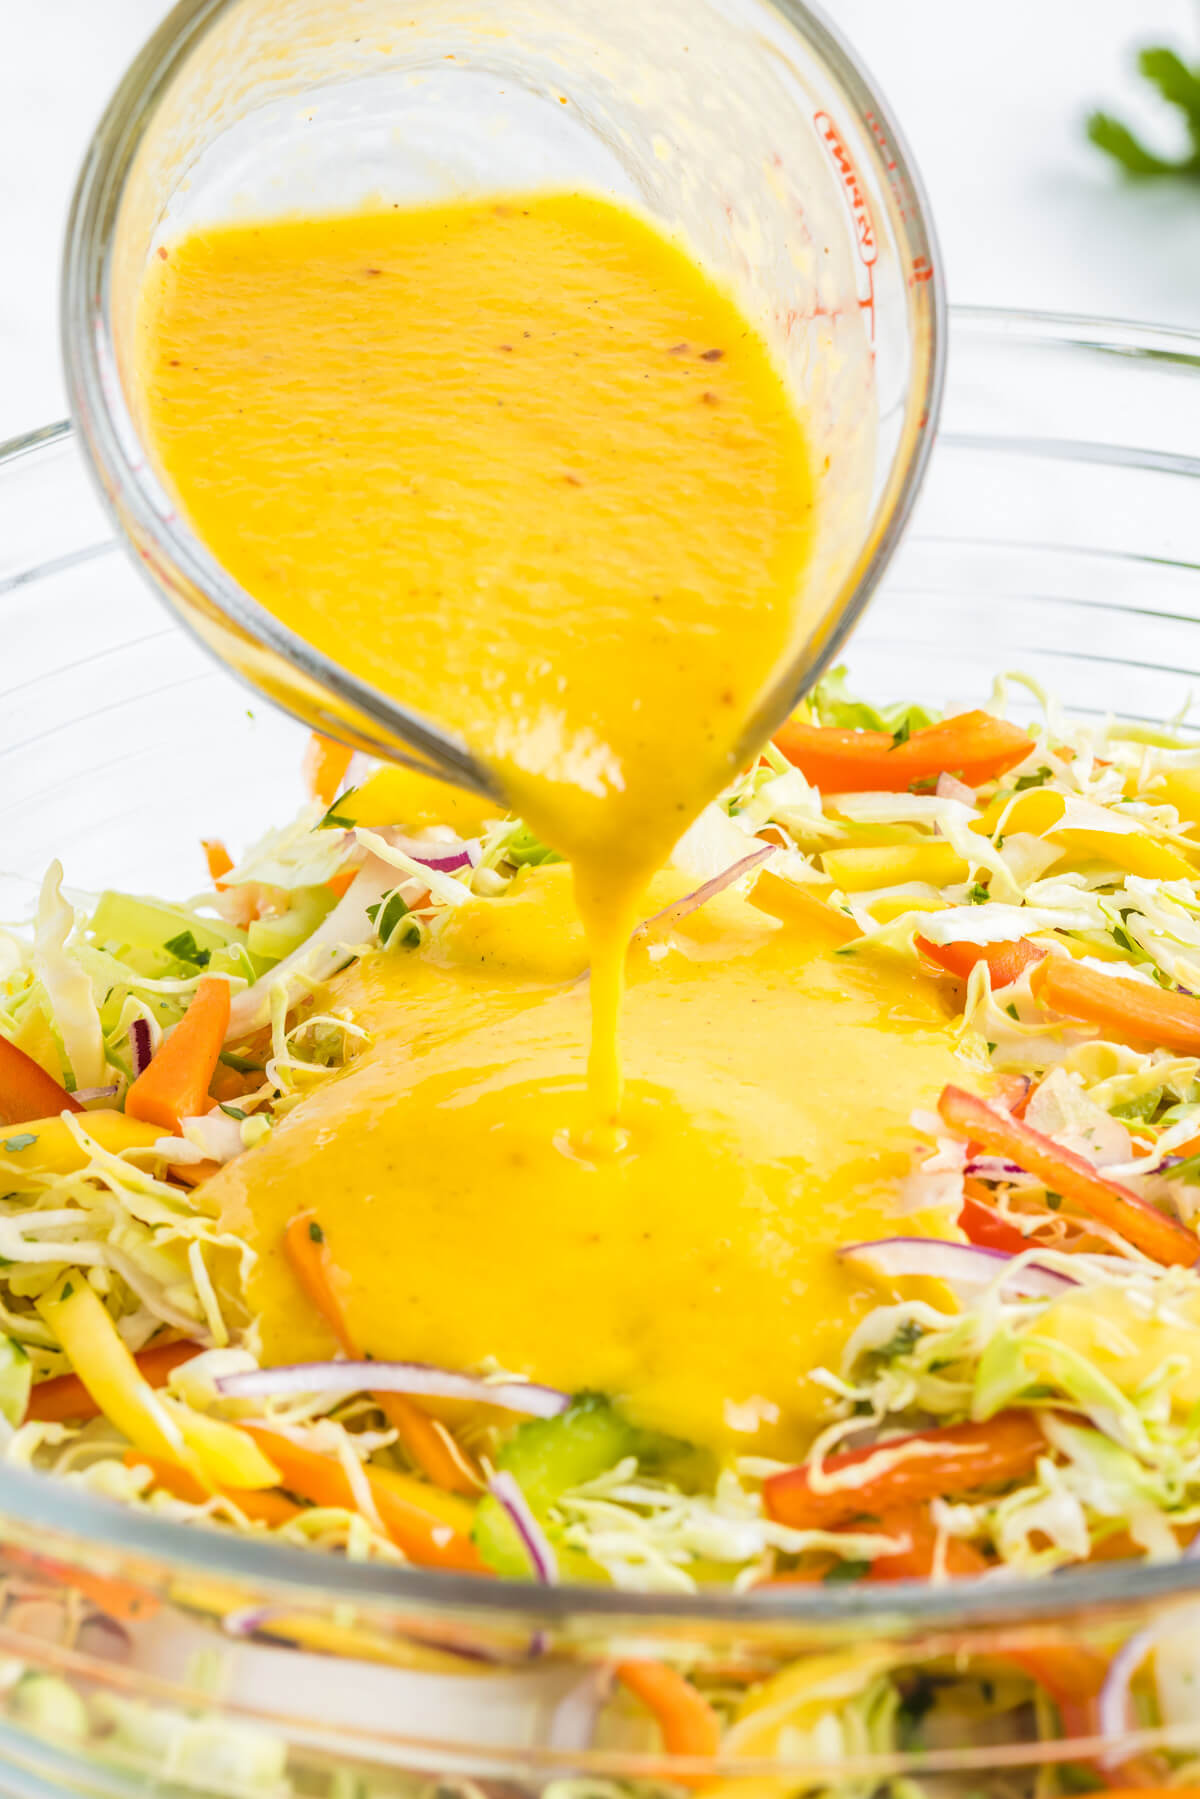 Mango salad dressing being poured over a bowl of shredded coleslaw mix.